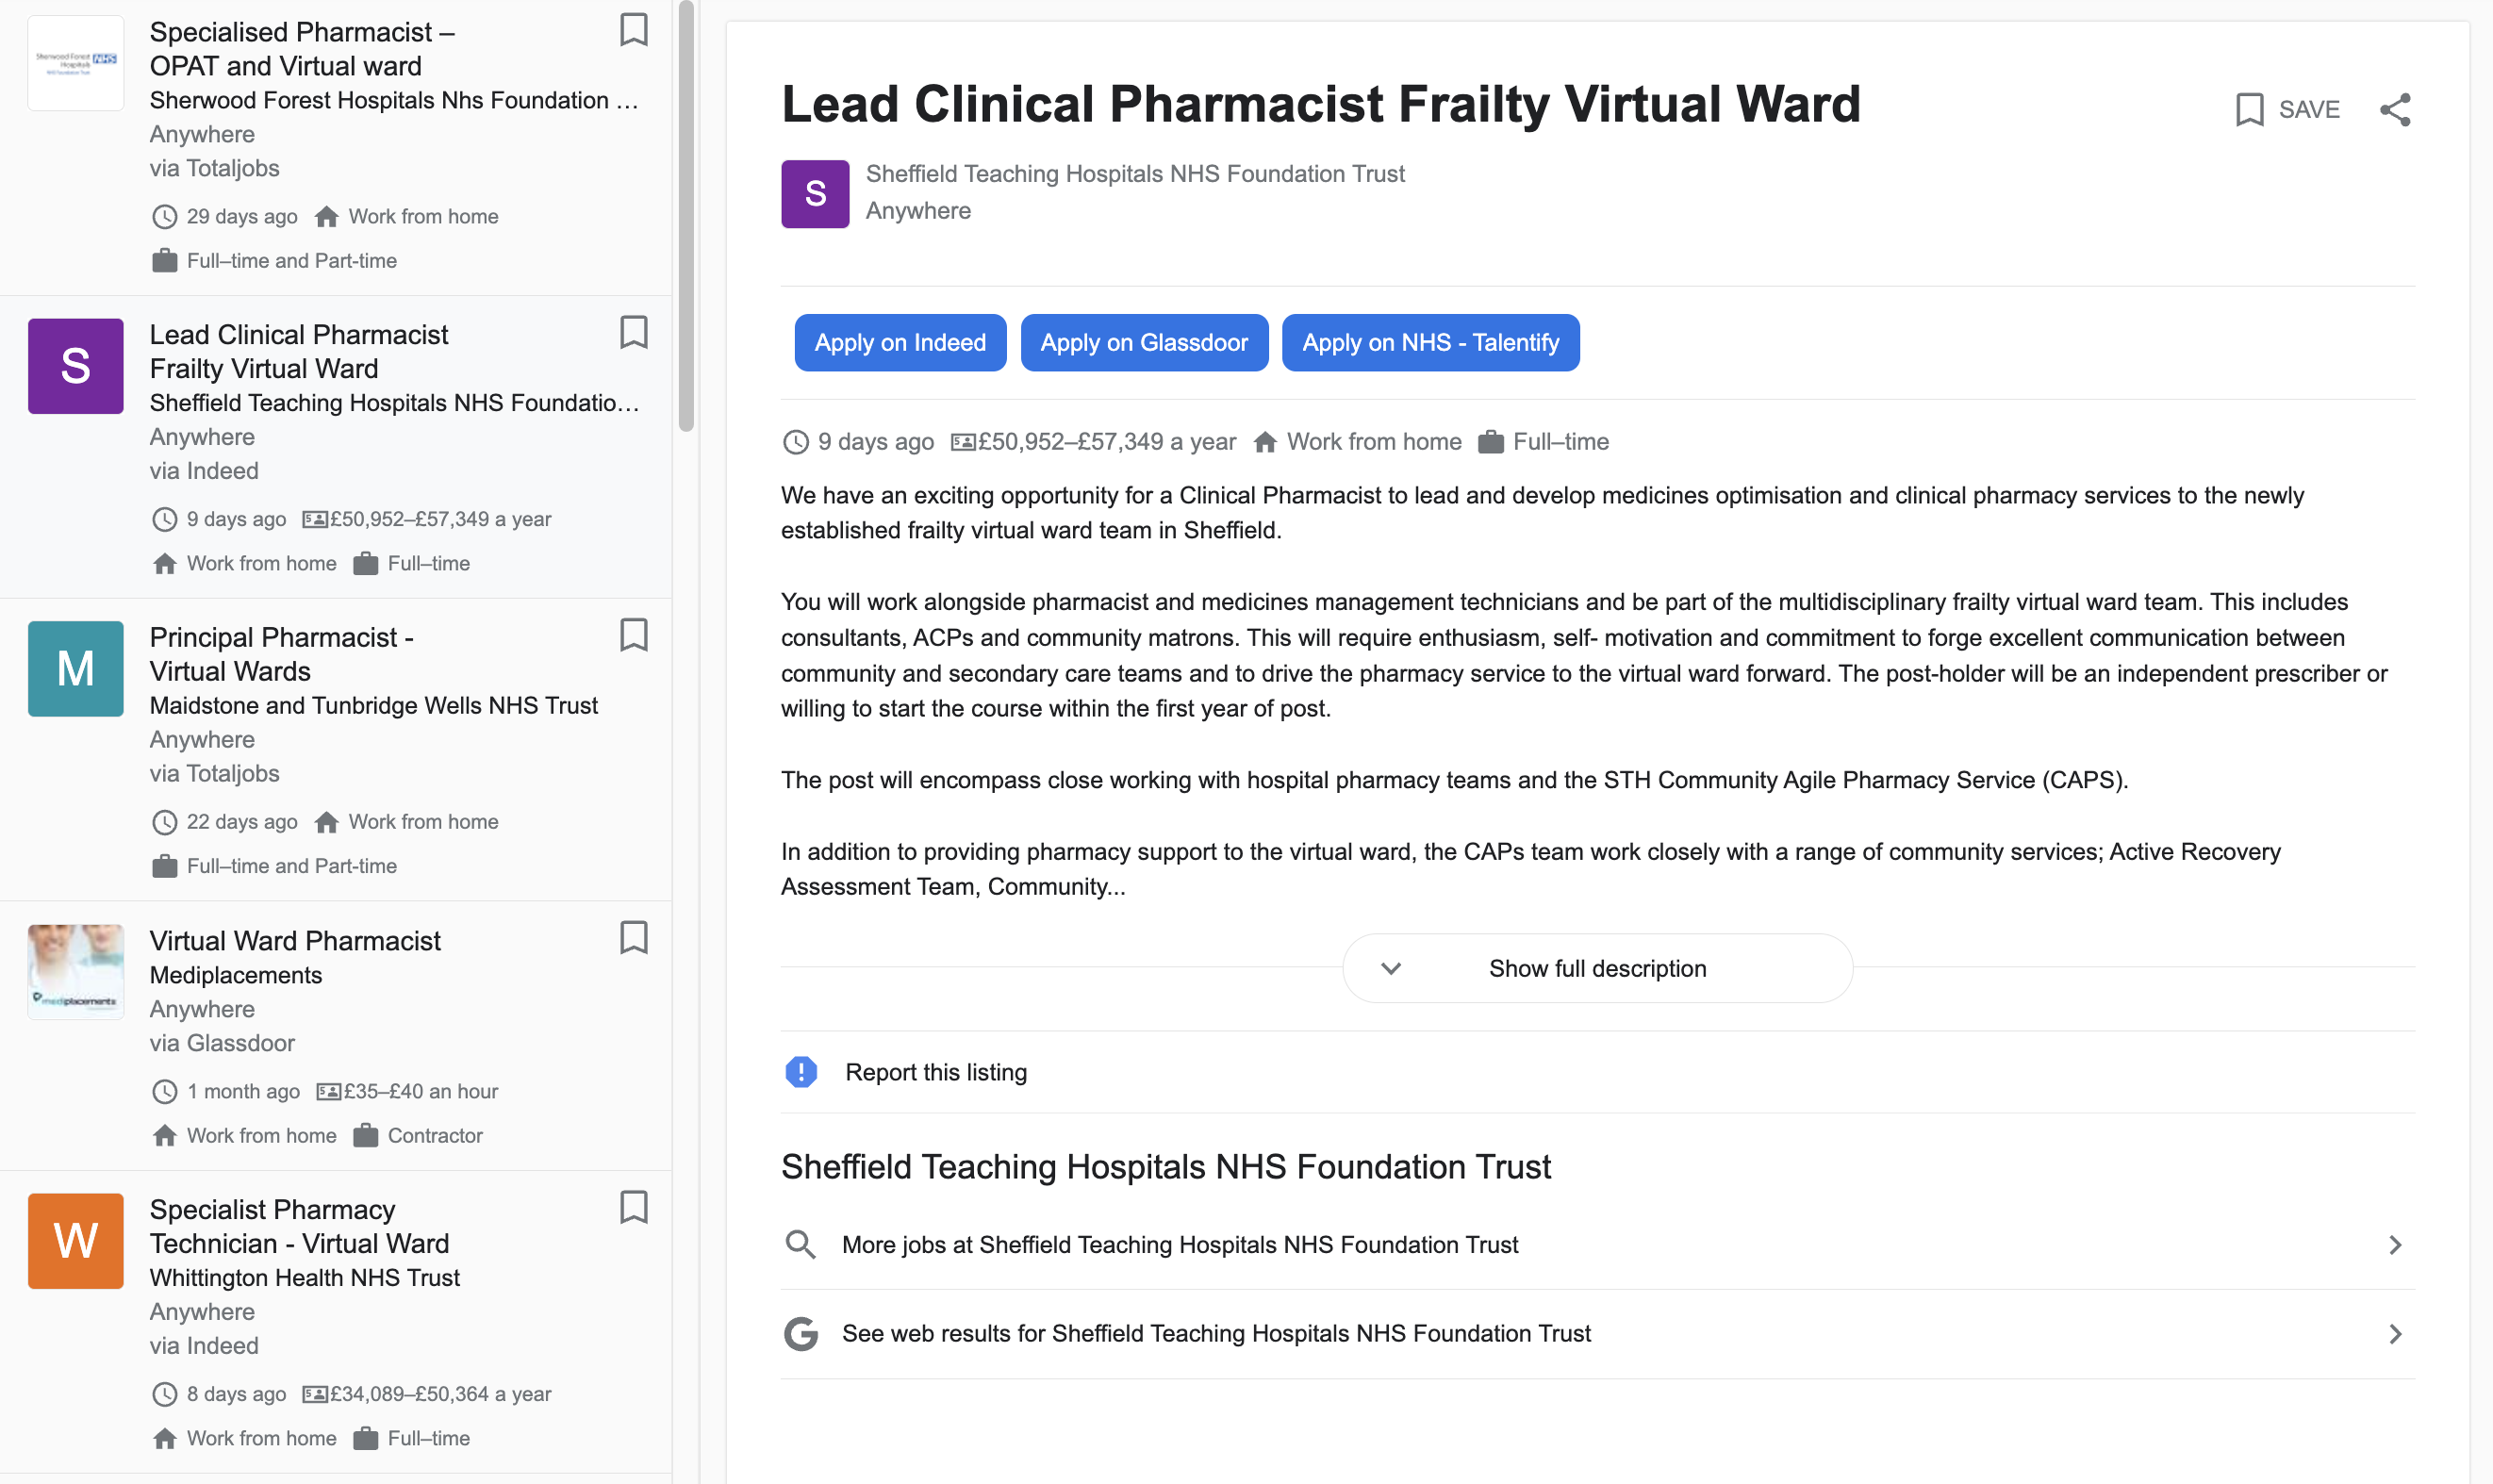 A screen cap of a Google jobs list of currently available virtual ward pharmacy jobs